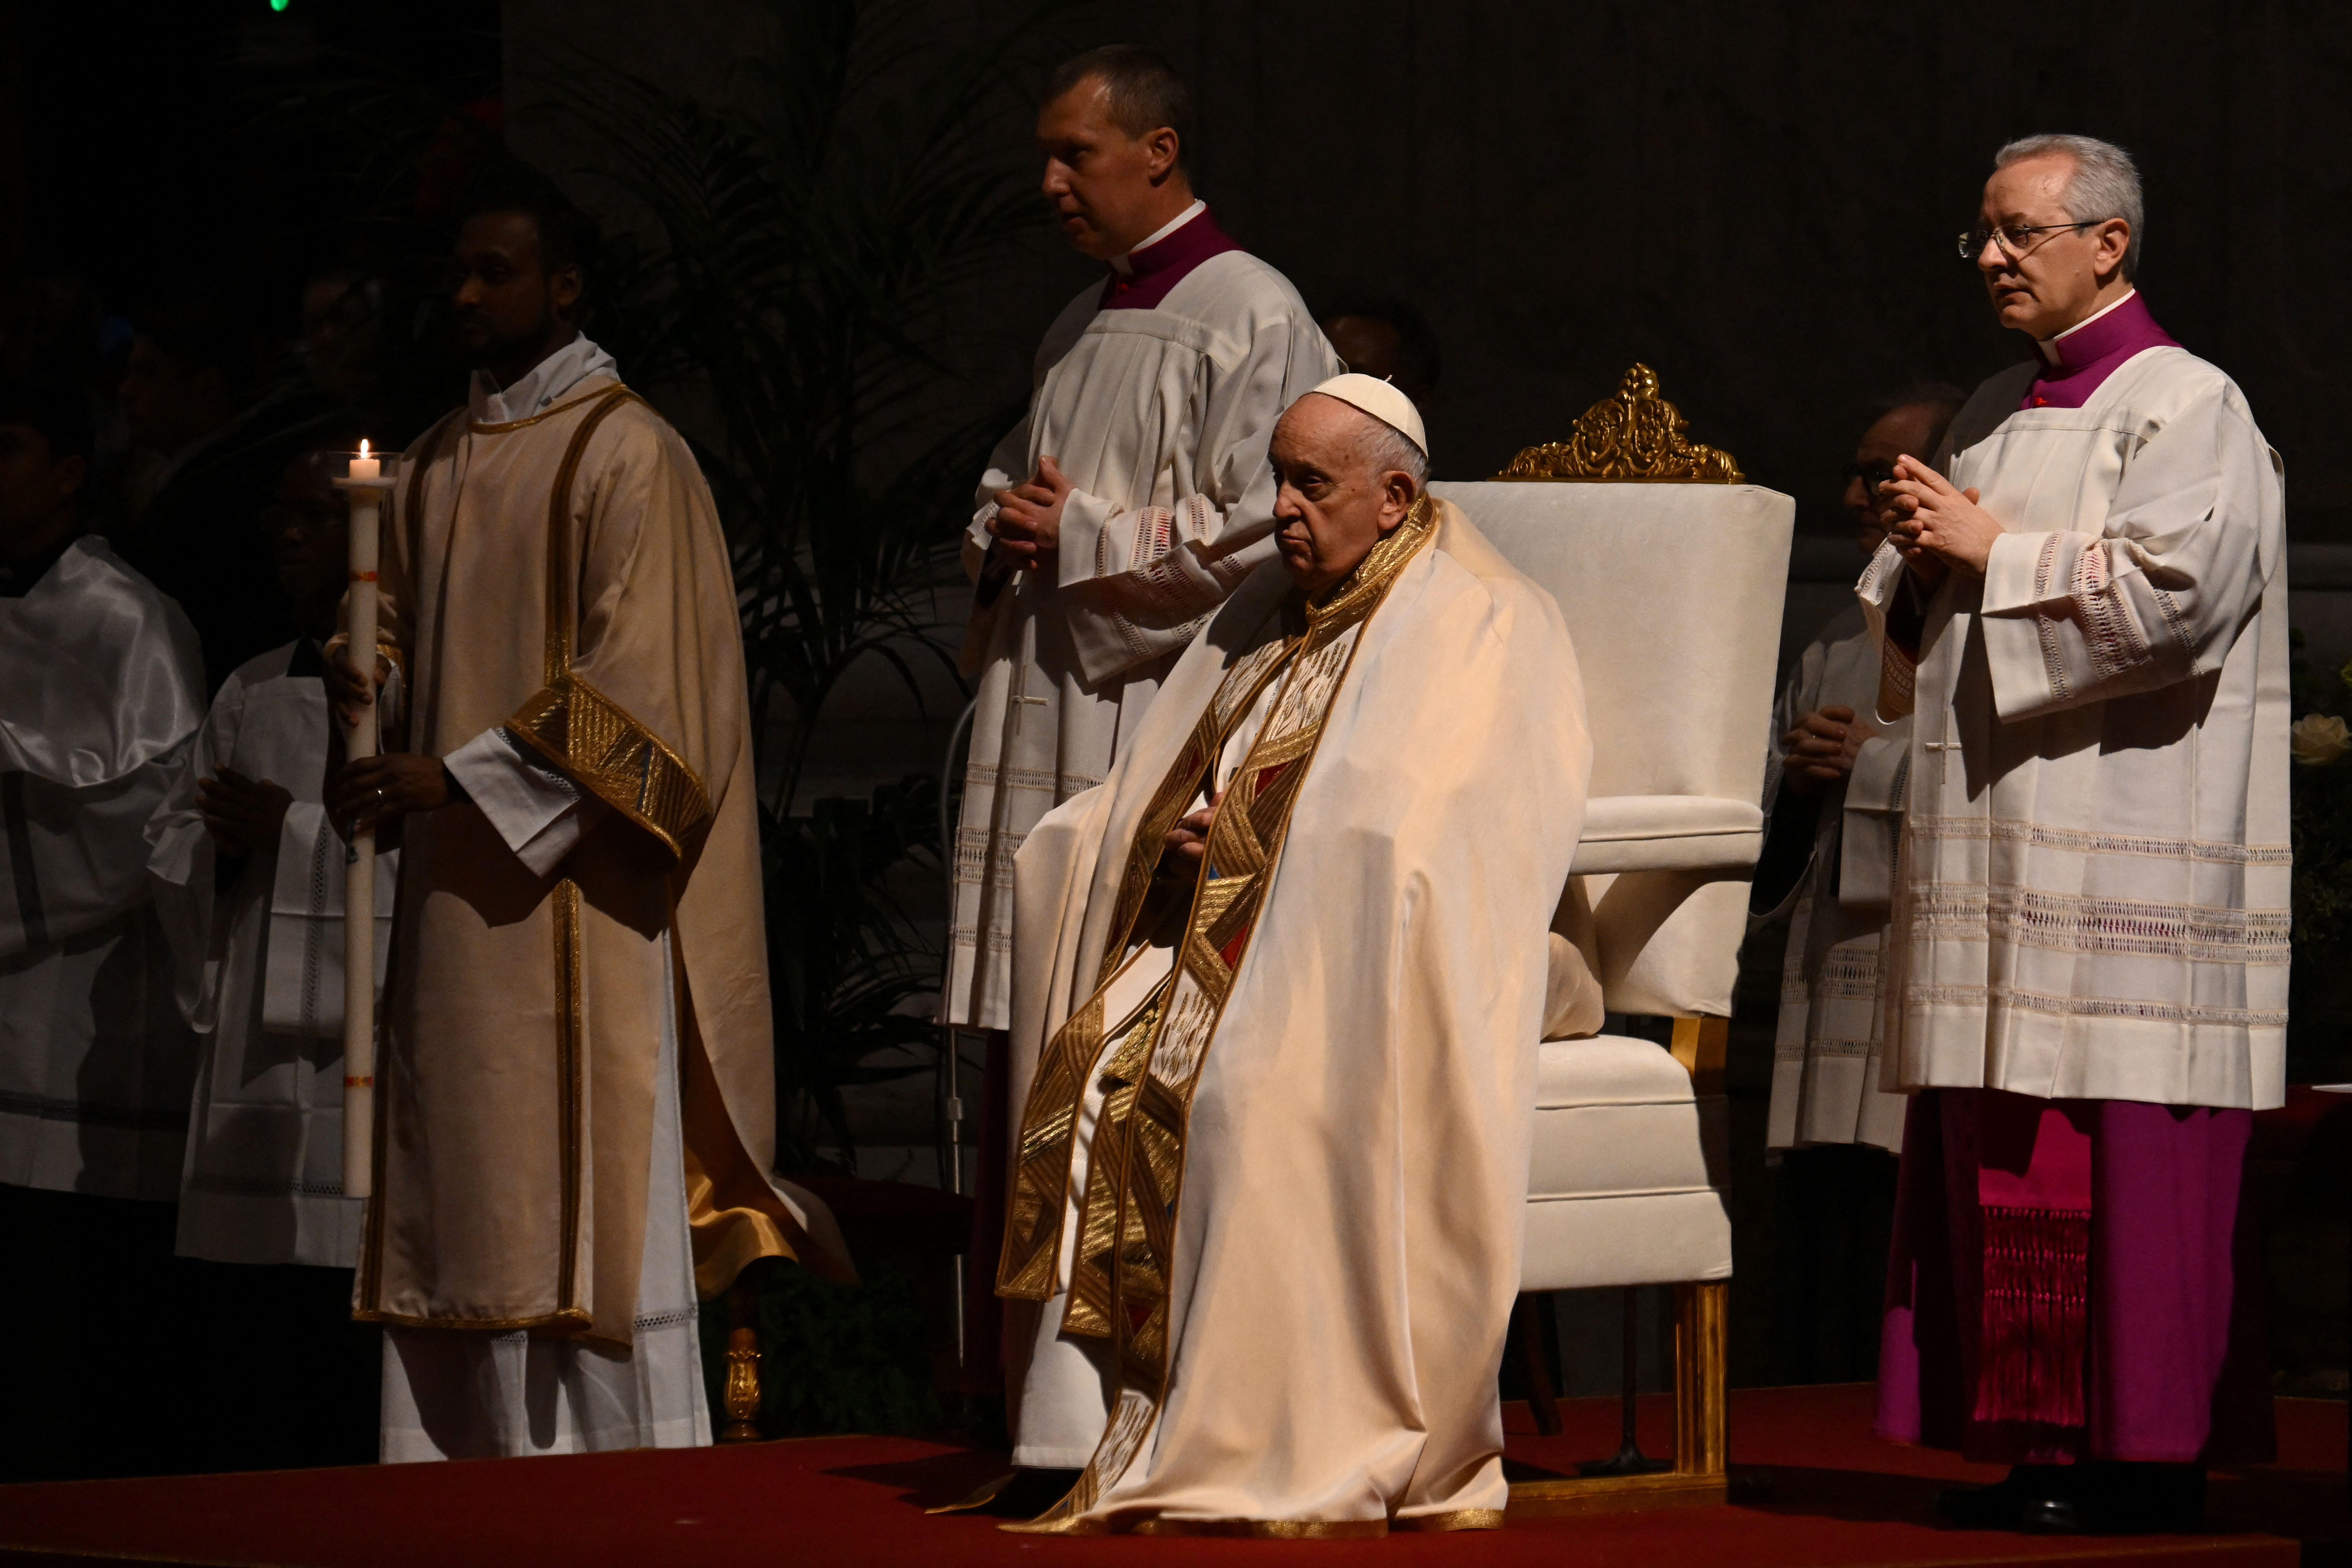 Pope Francis leads a Mass at St Peter's Basilica in Vatican City on February 2.